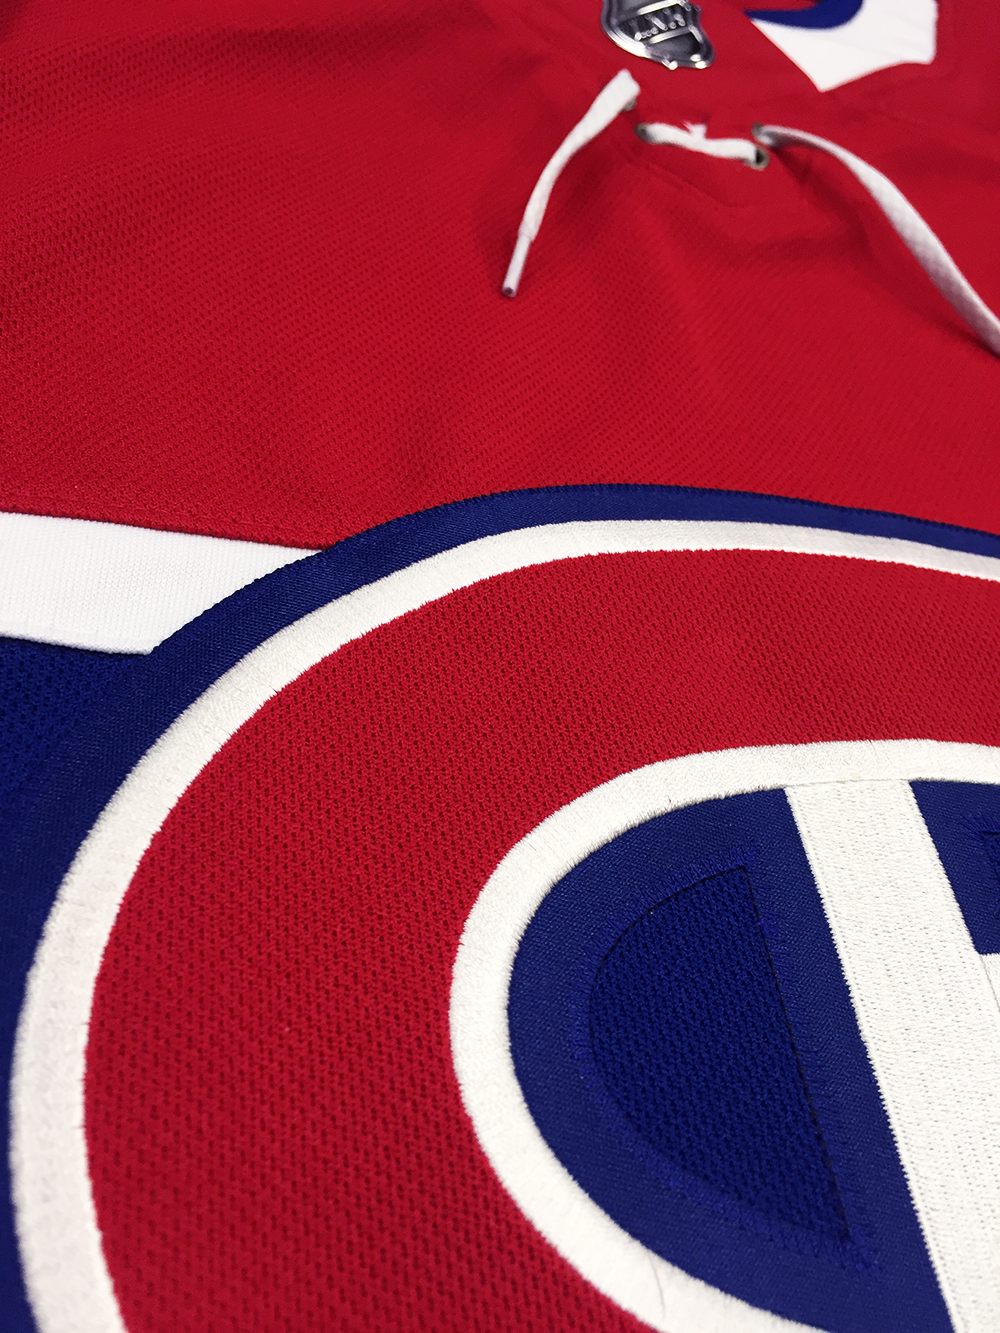 montreal canadiens adidas jersey